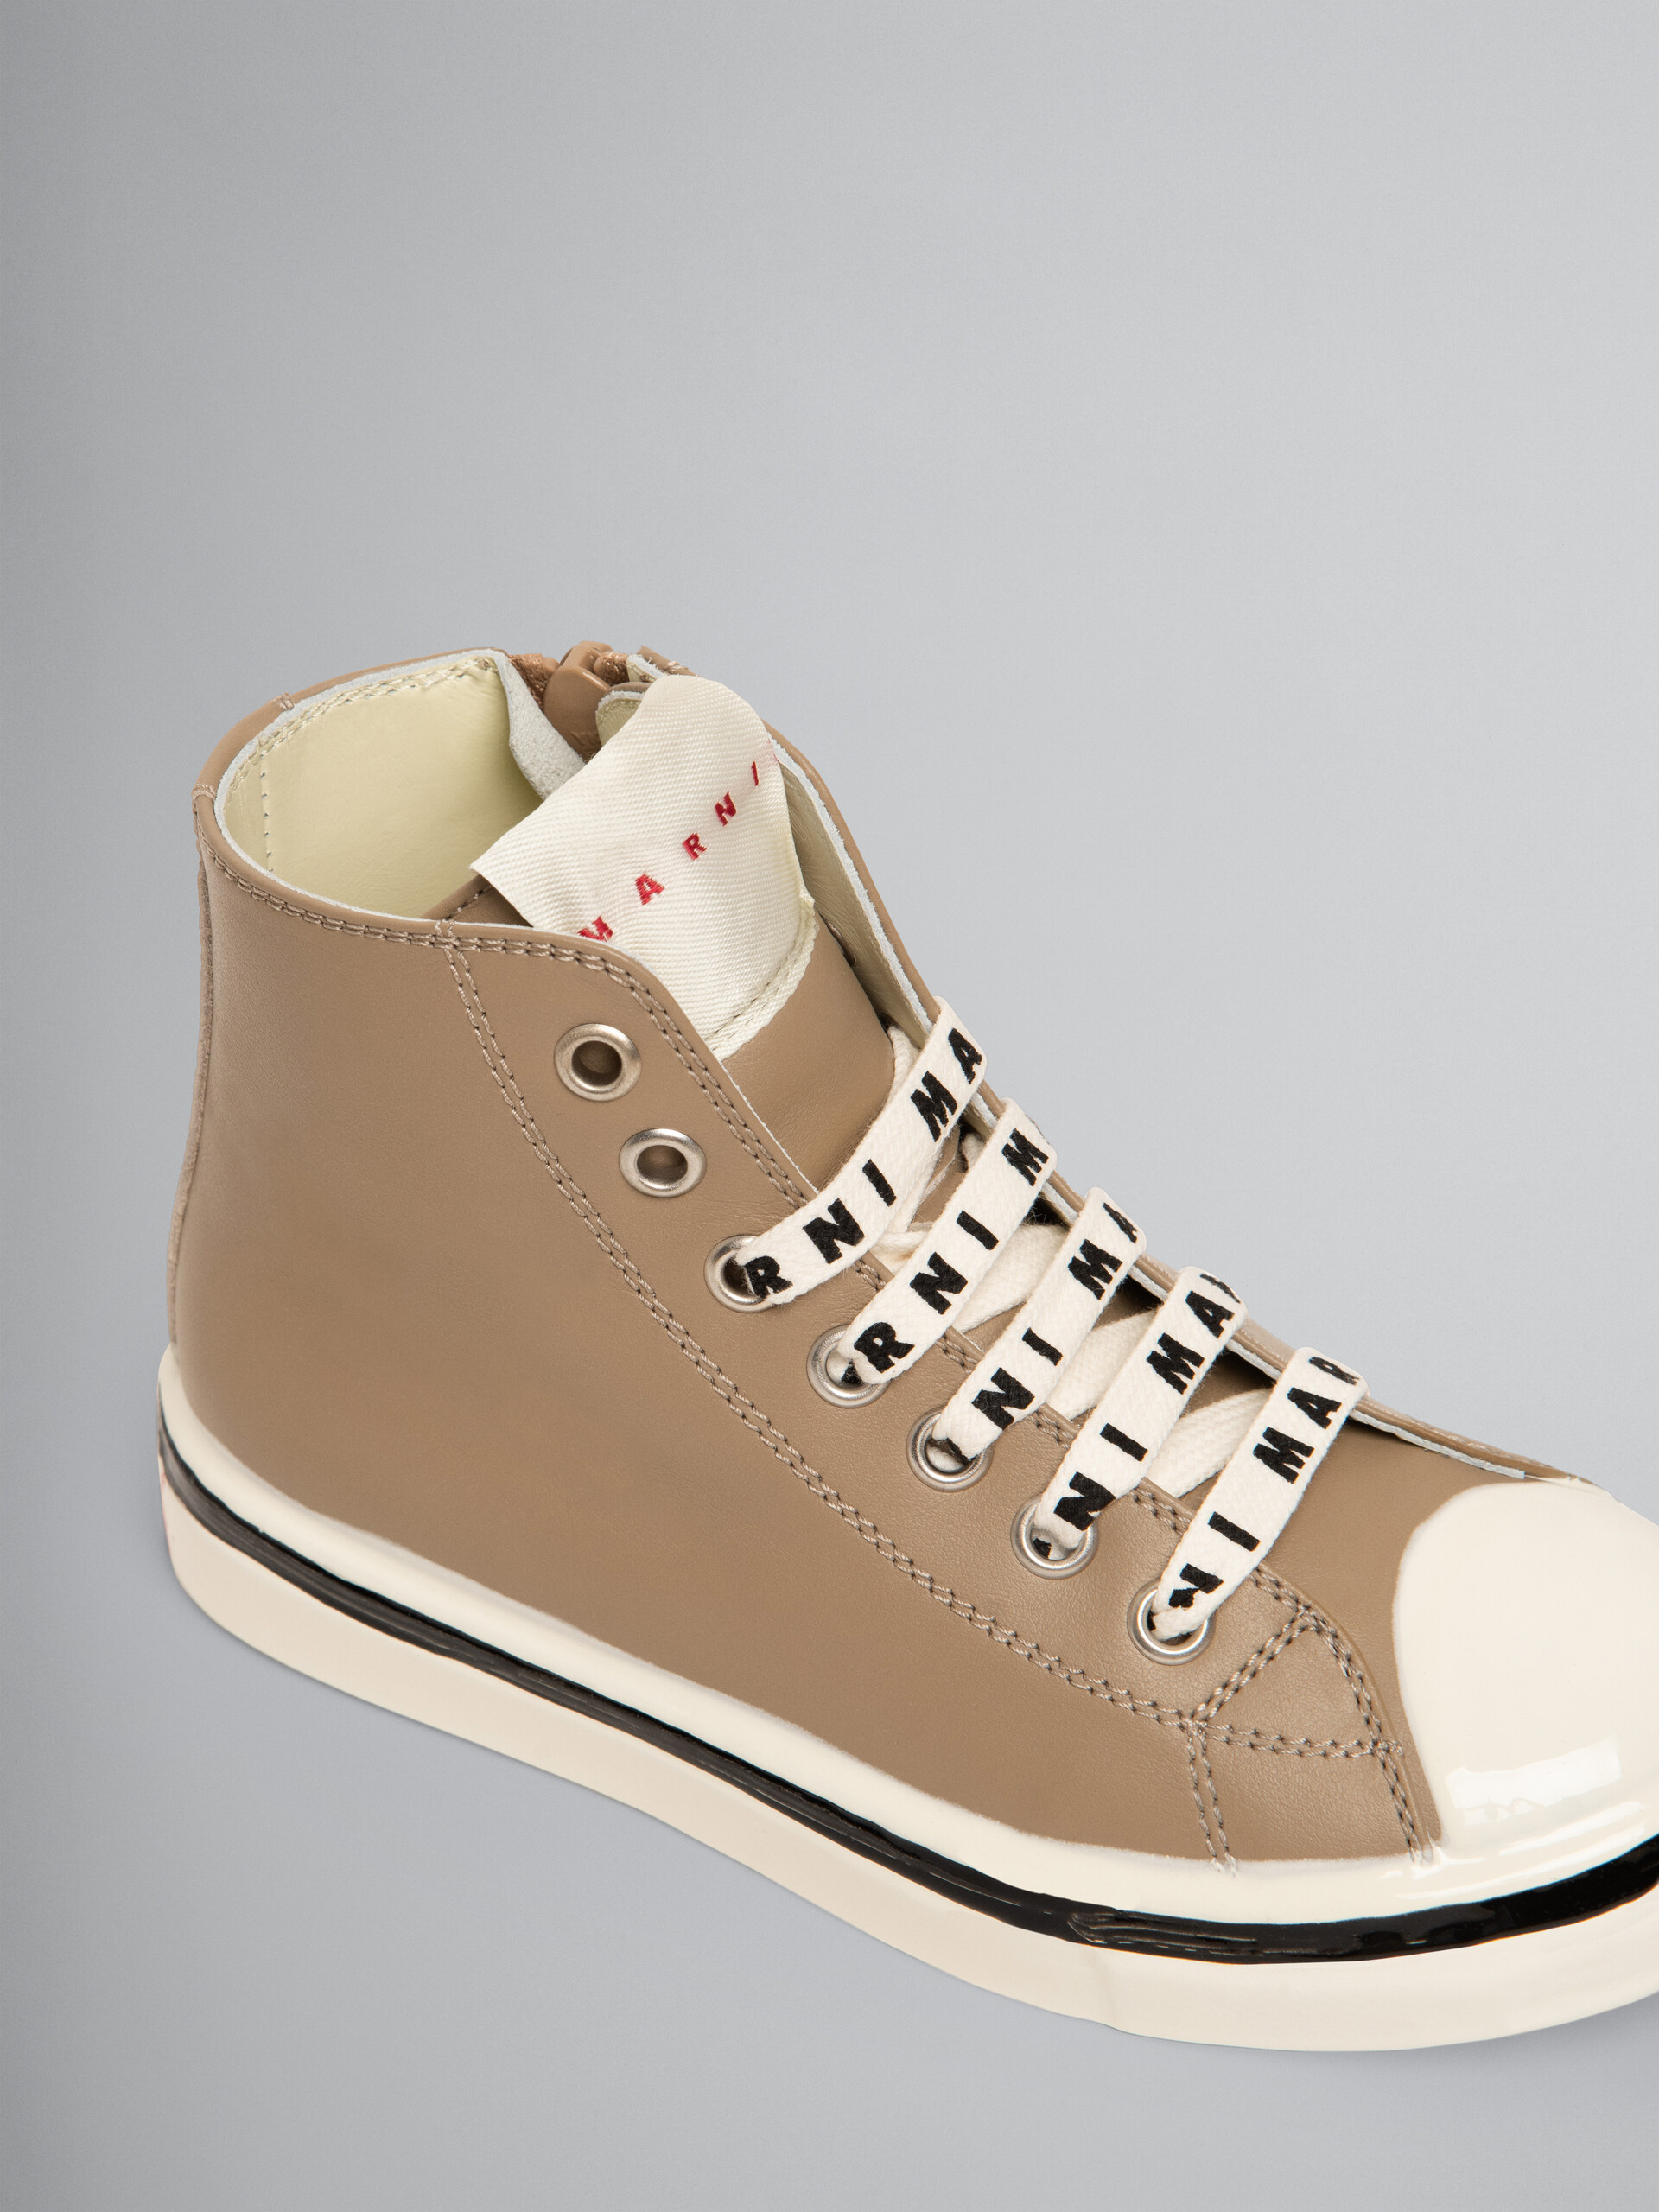 Brown leather sneaker - Other accessories - Image 4